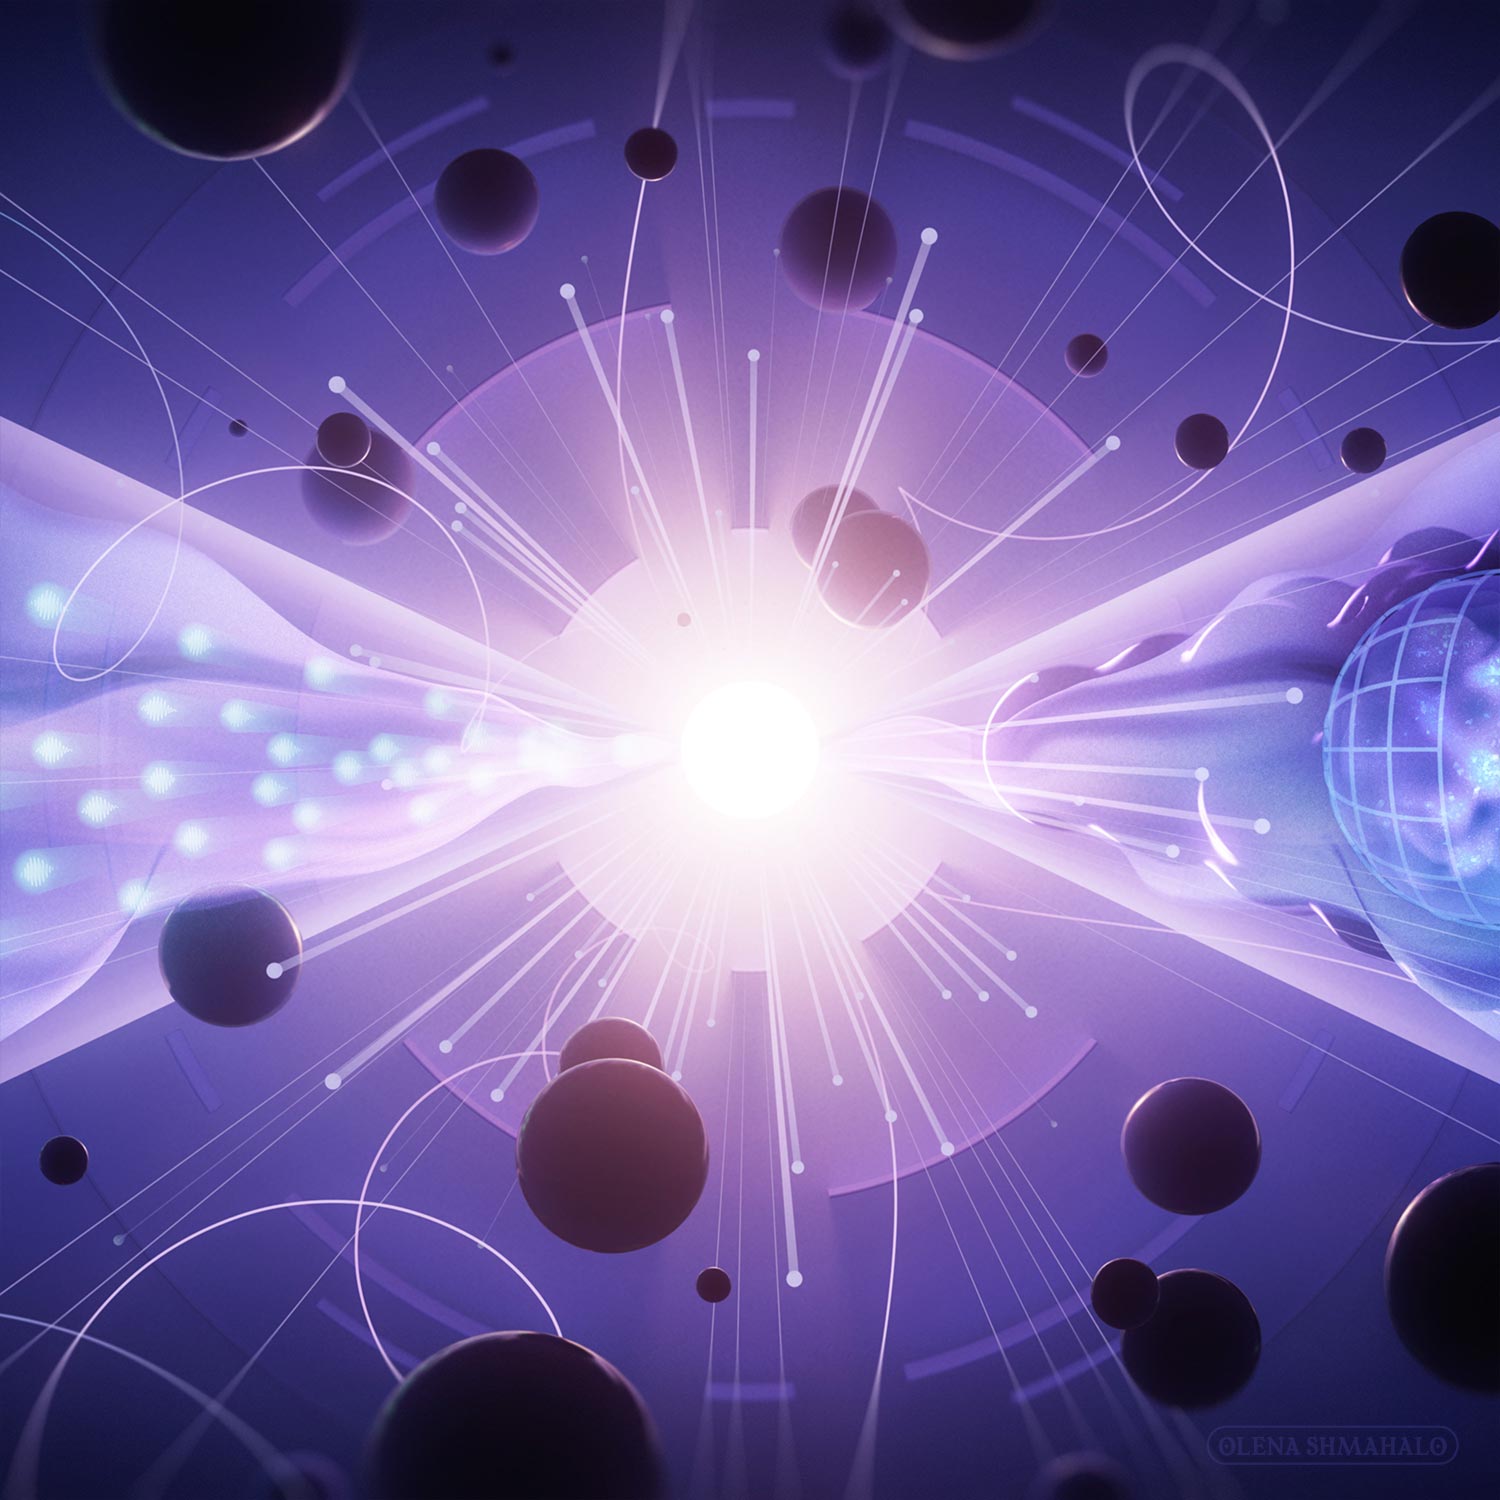 A semi-abstract 3D artwork depicting subatomic and astronomical physics. Crop of the middle panel, illustrating the topic *Explore New Paradigms in Physics* from the 2023 P5 report: Particle tracks burst out of a bright center, suggestive of a high-energy event / the Big Bang. Two light cones emerge from this explosion towards the left and right, along with elements corresponding to quantum physics and astrophysics respectively. Art by Olena Shmahalo for U.S. Particle Physics.